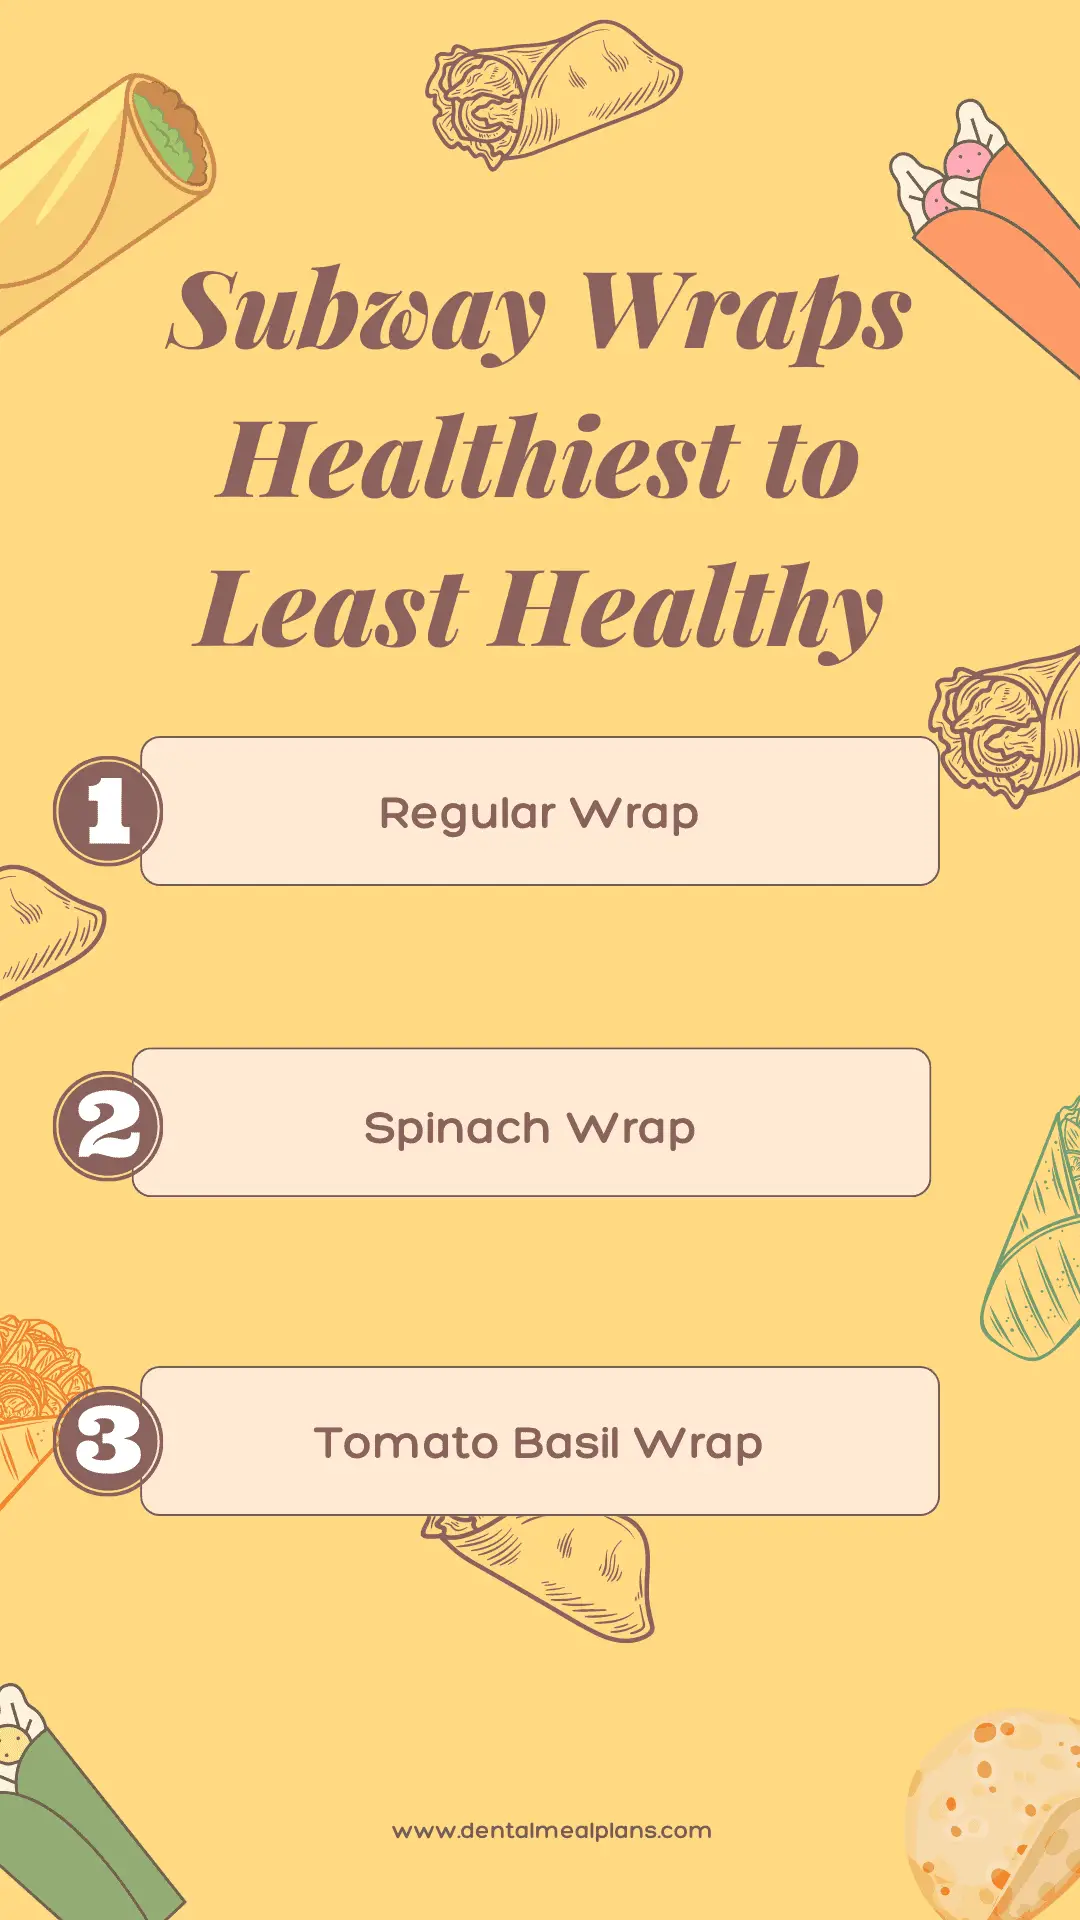 subway wraps healthiest to least healthy